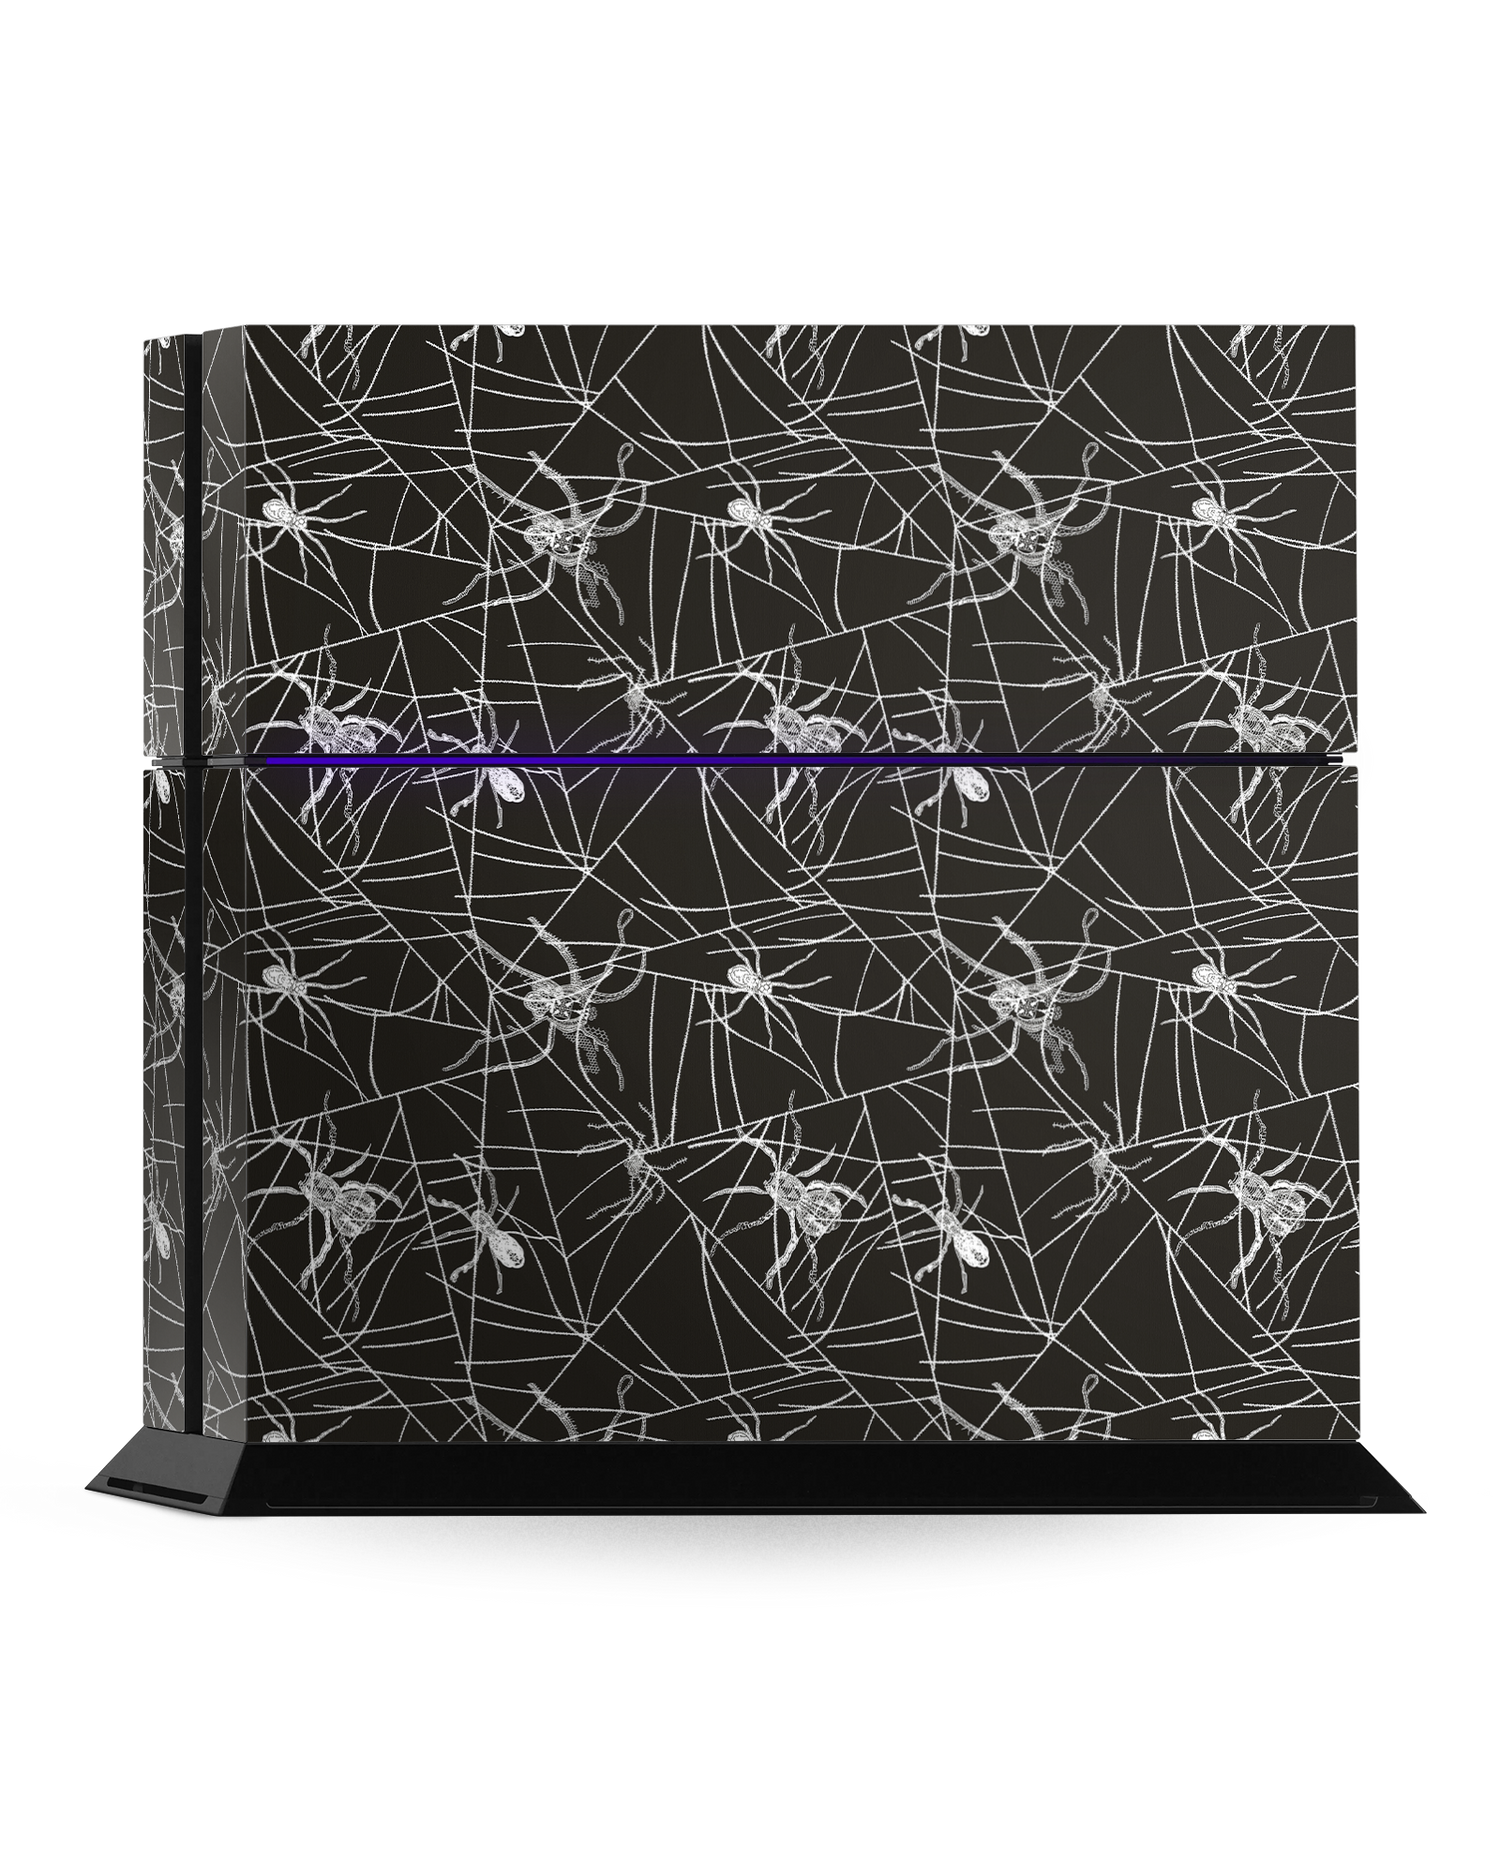 Spiders And Webs Console Skin for Sony PlayStation 4: Standing